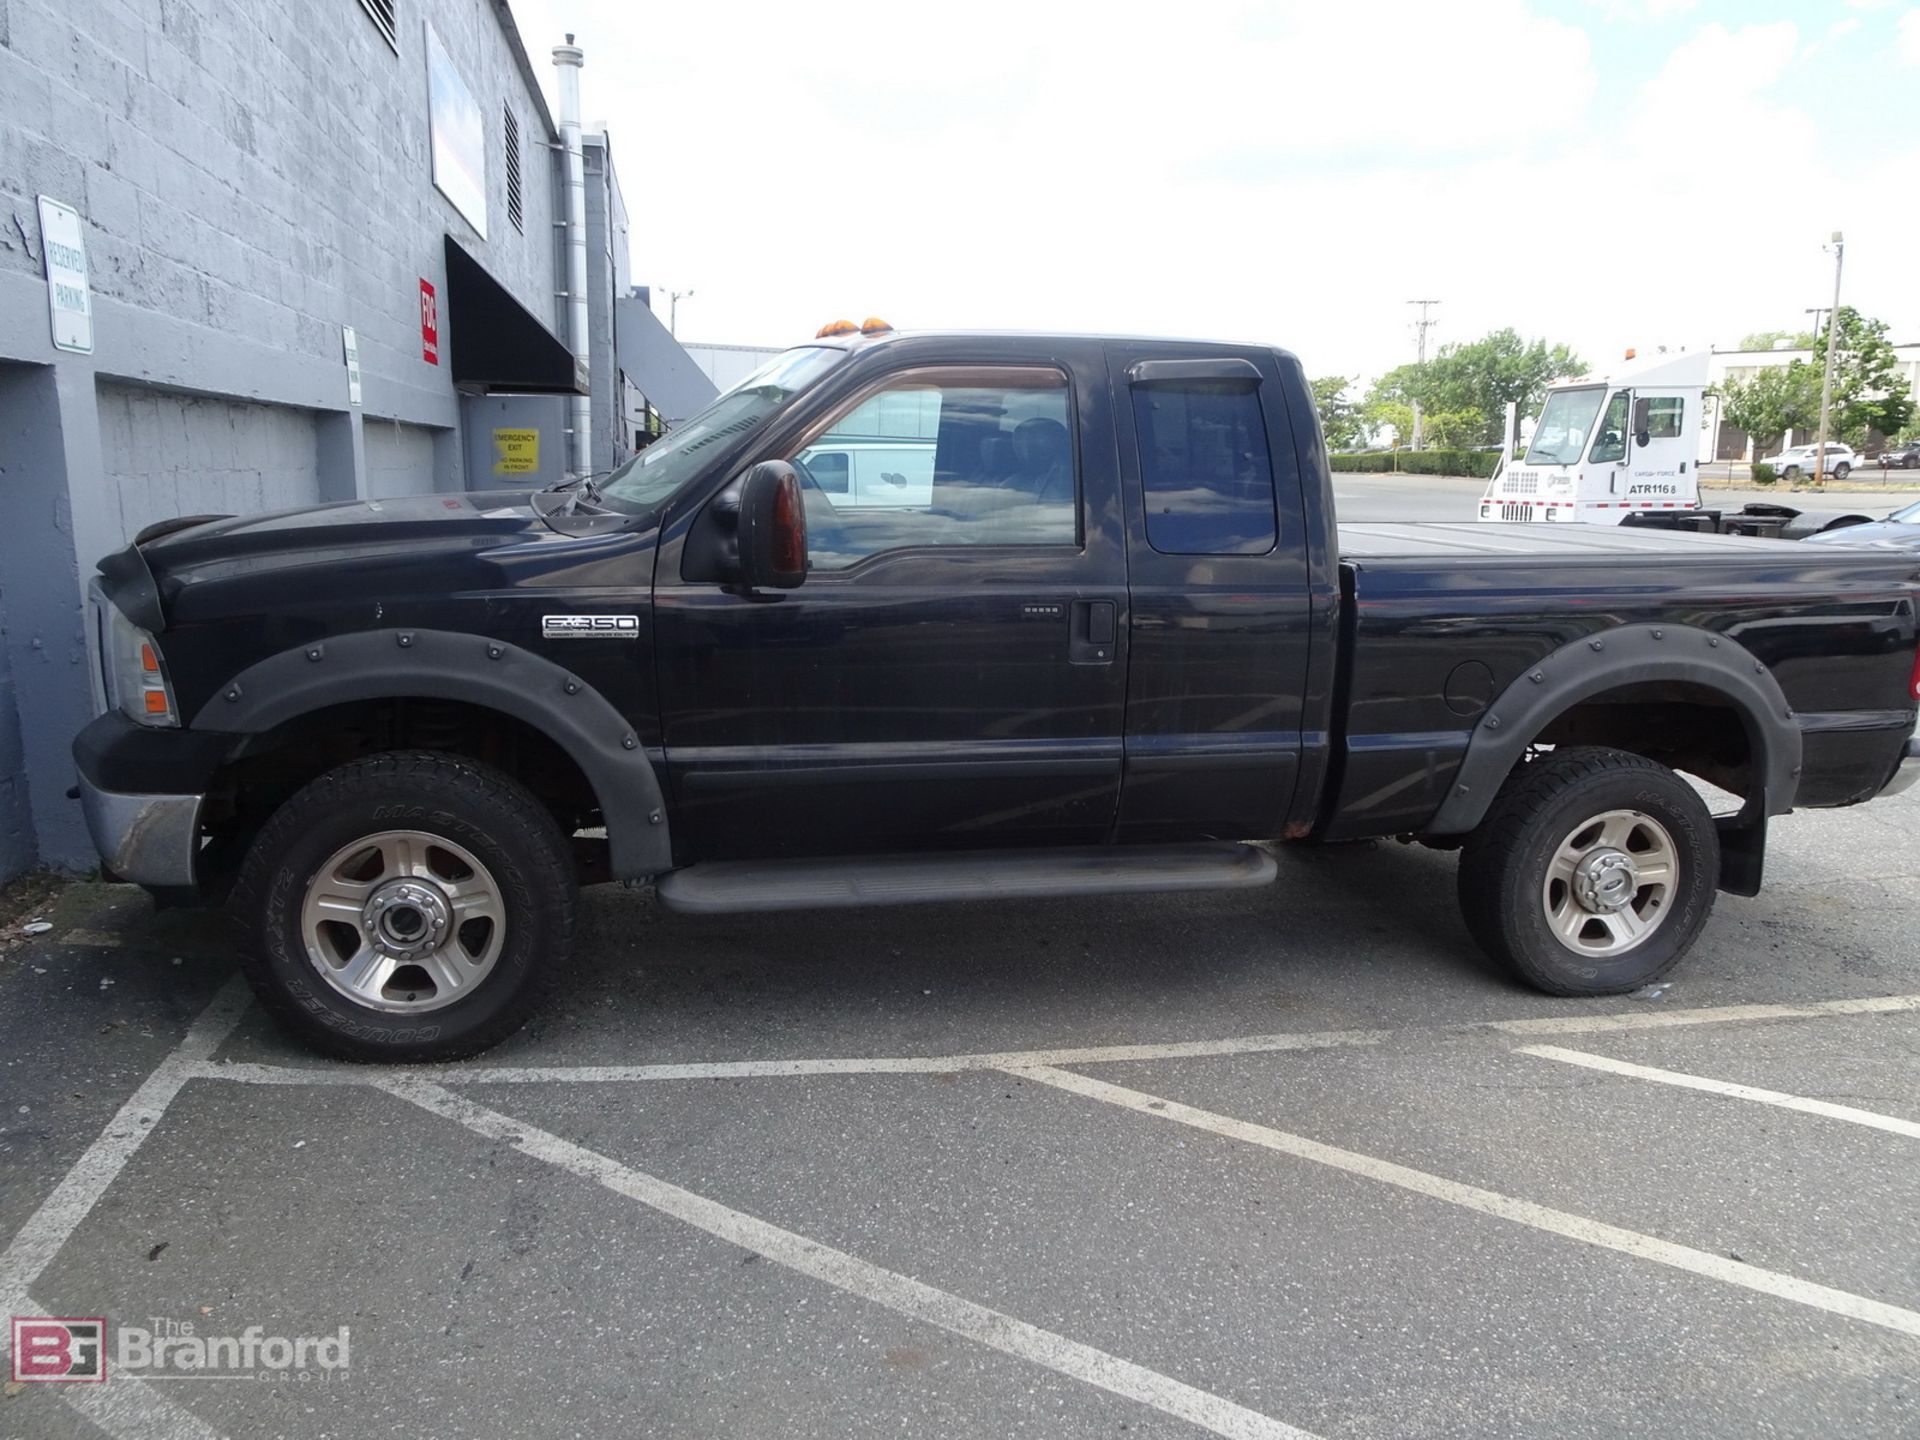 2005 Ford F-350 Pickup Truck - Image 5 of 6